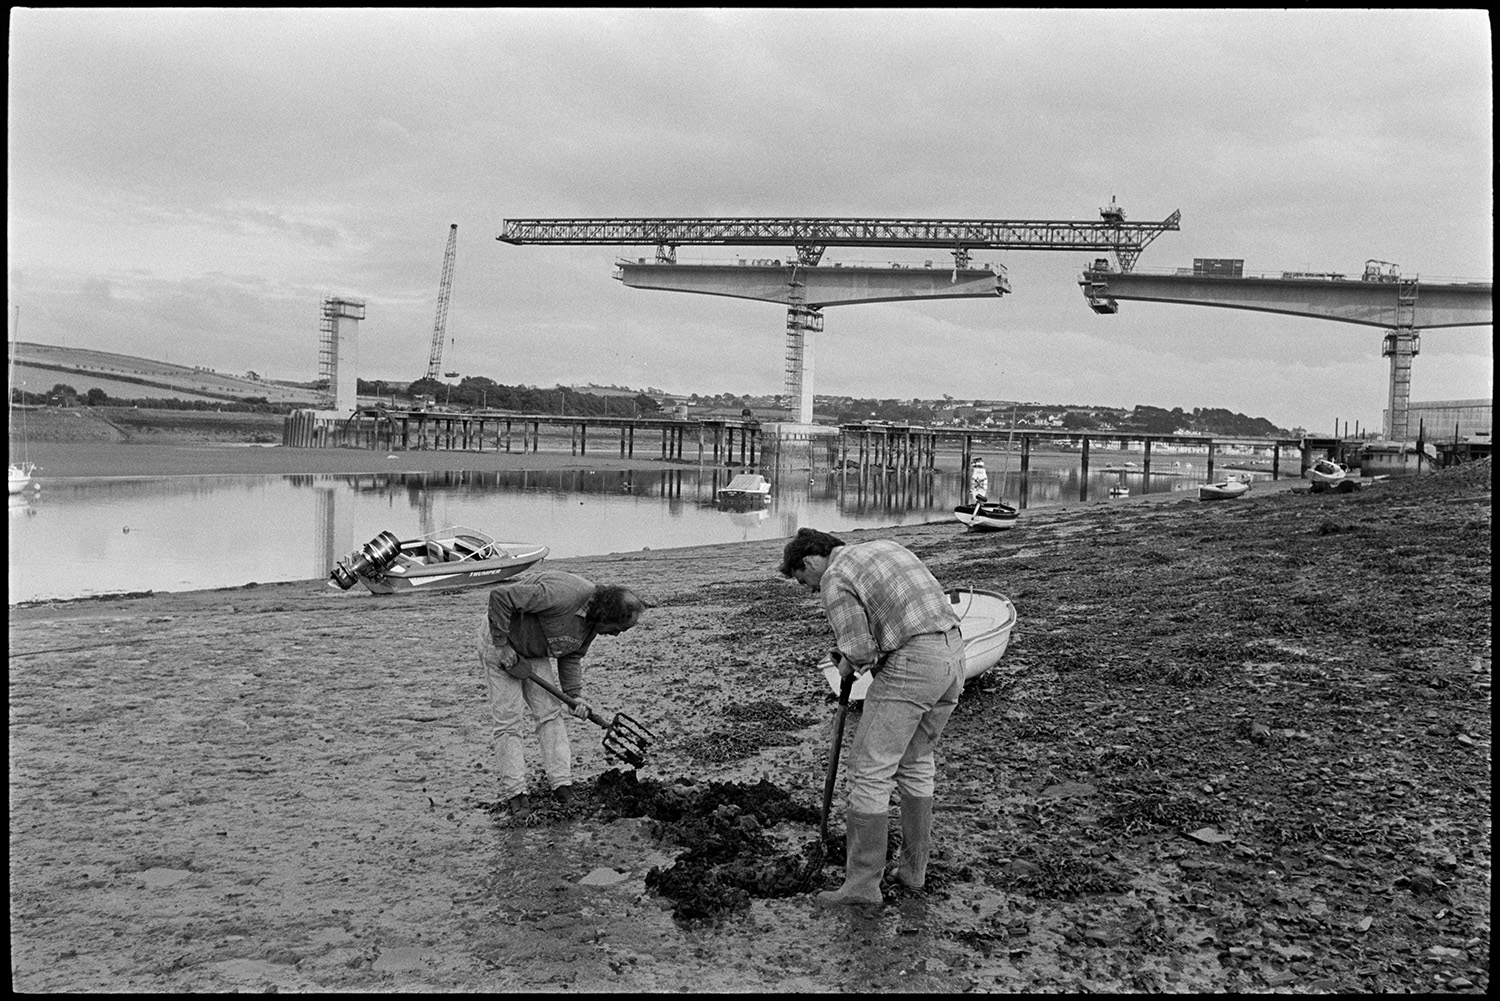 River views with new bridge being built, men digging worms for bait, boats. Garden chairs. 
[Two men digging for worms for bait on the mud flats of the river Torridge at Bideford. Cranes are constructing Bideford New Bridge in the background. Small boats are moored on the river and the mud flats.]